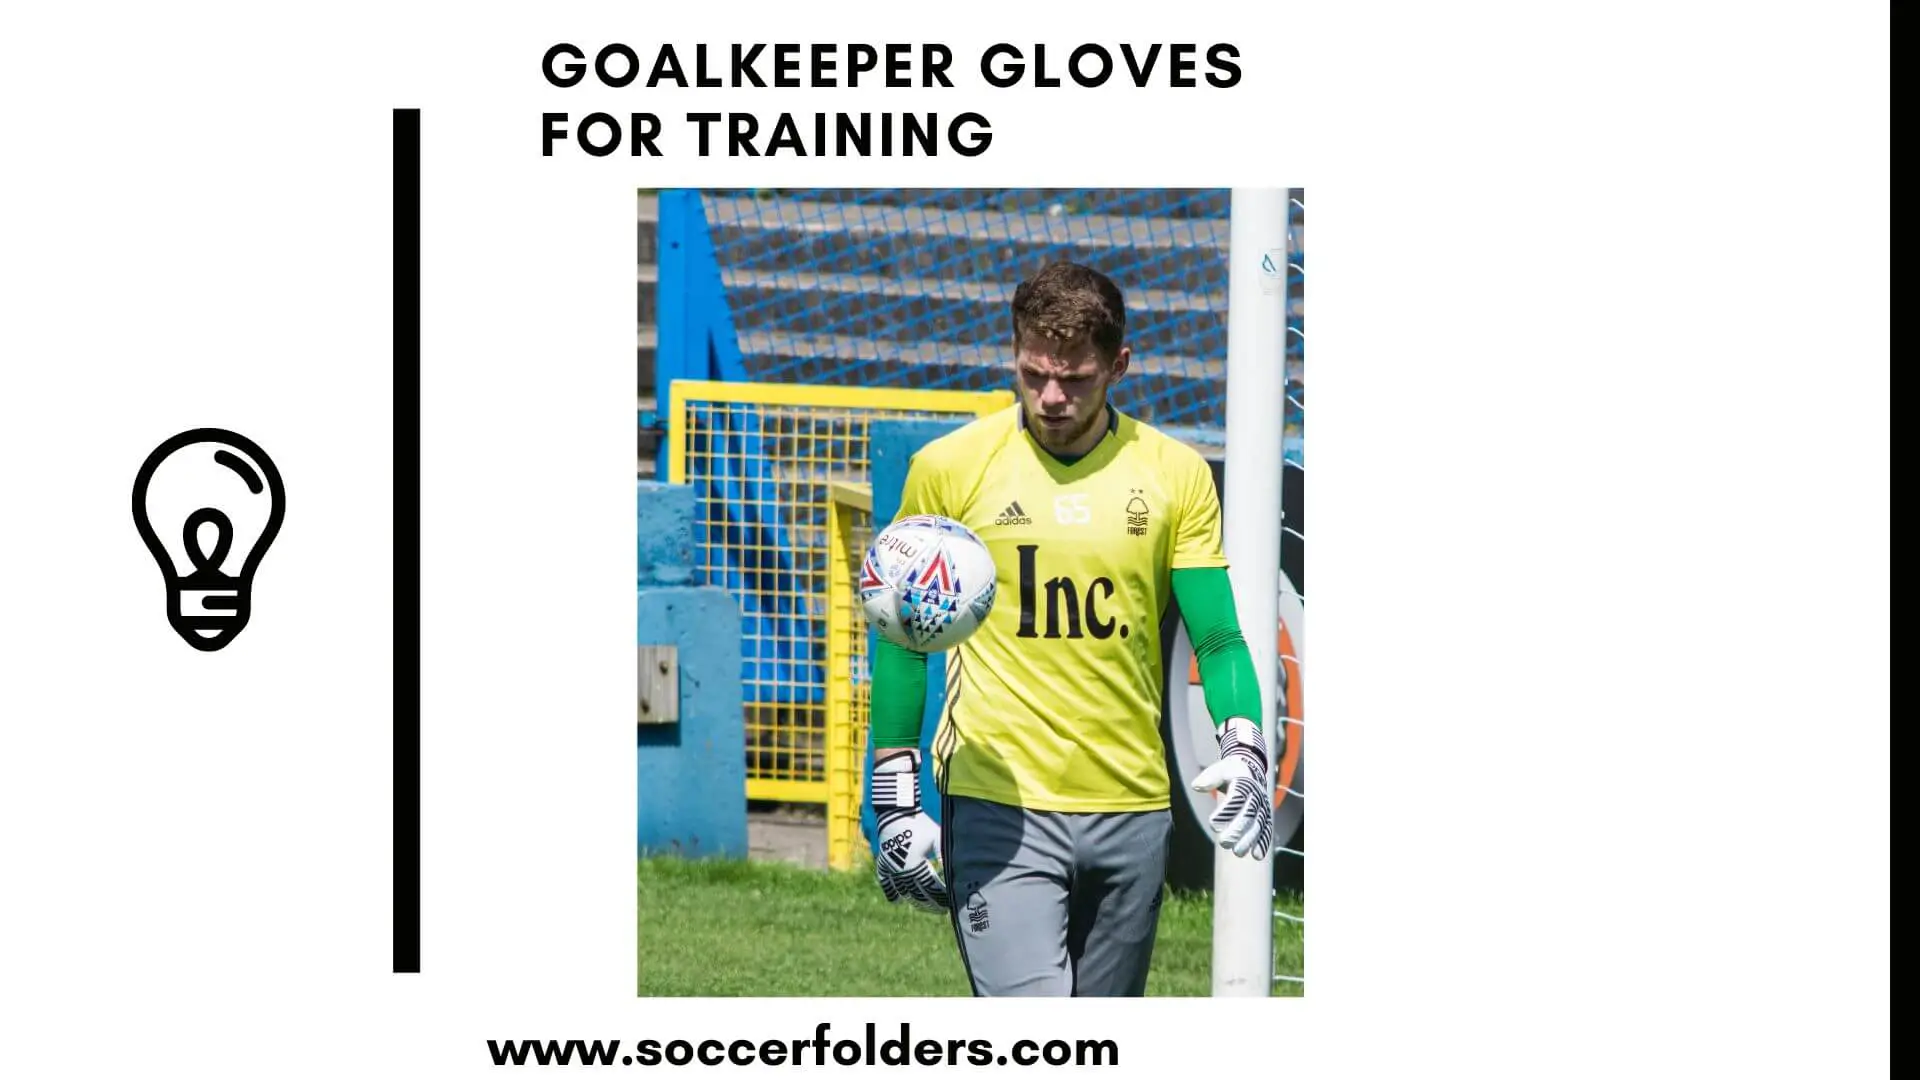 Goalkeeper gloves for training - Featured image